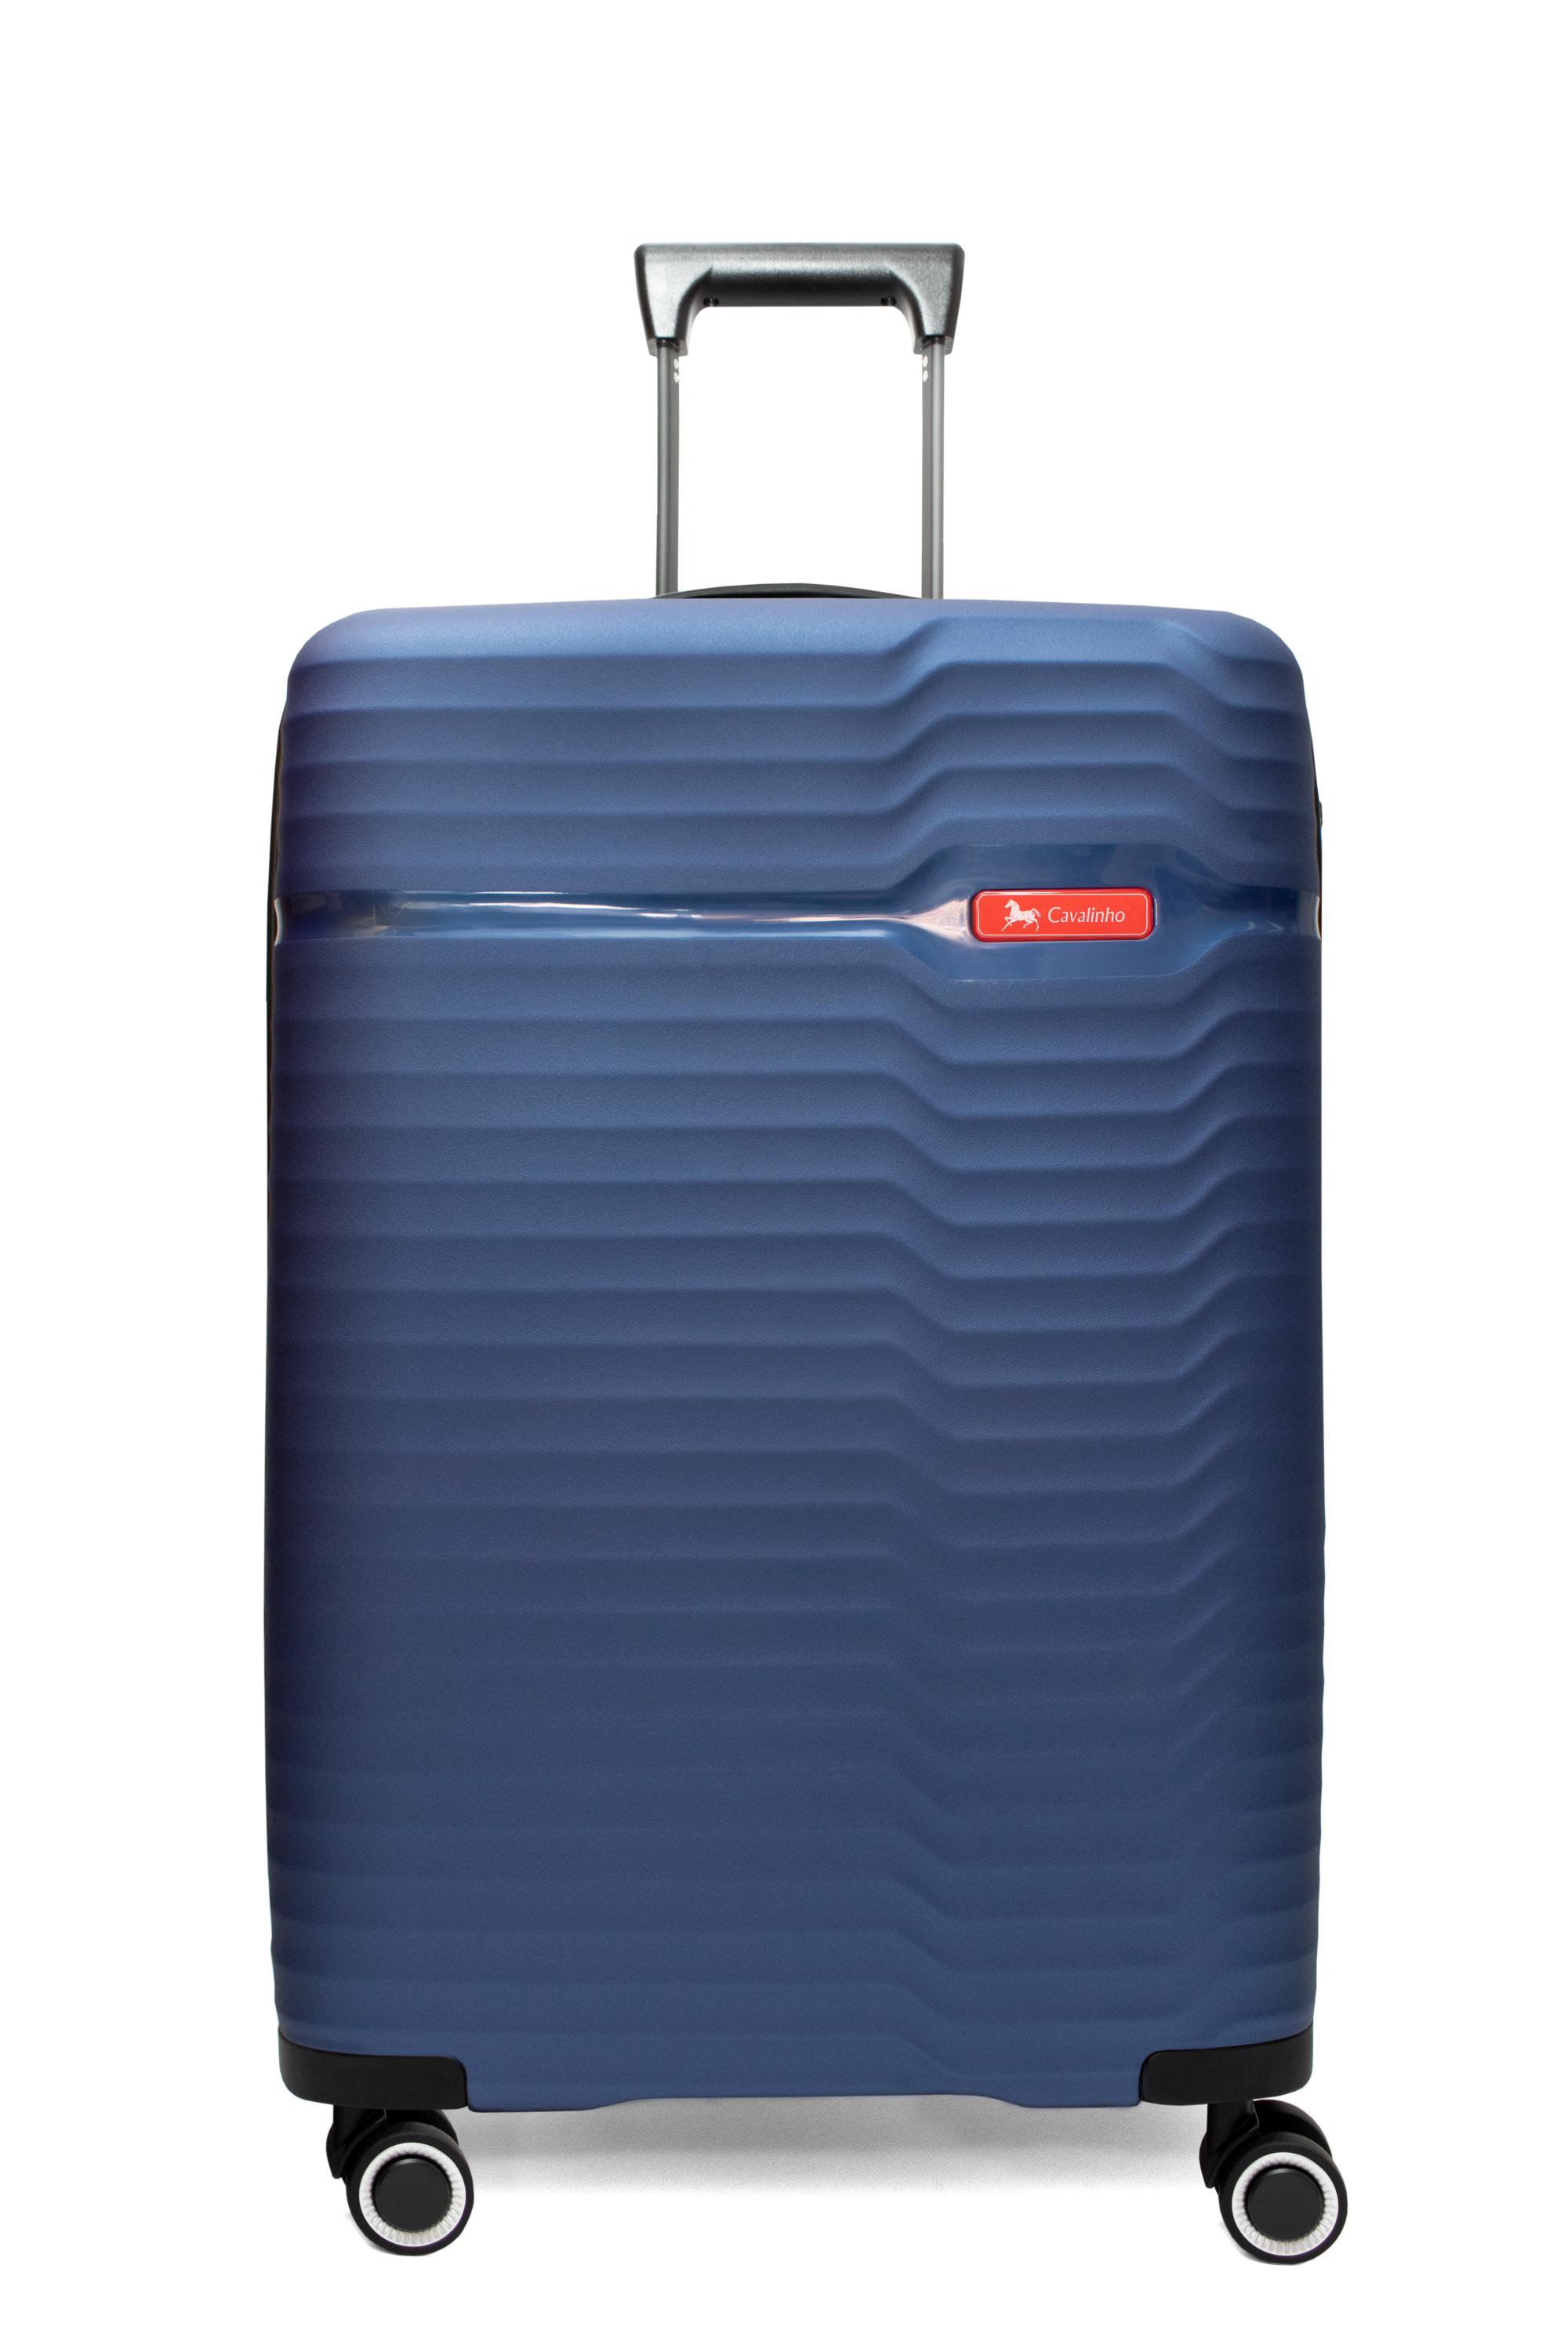 #color_ 24 inch SteelBlue | Cavalinho Check-in Hardside Luggage (24" or 28") - 24 inch SteelBlue - 68010003.03.24_1